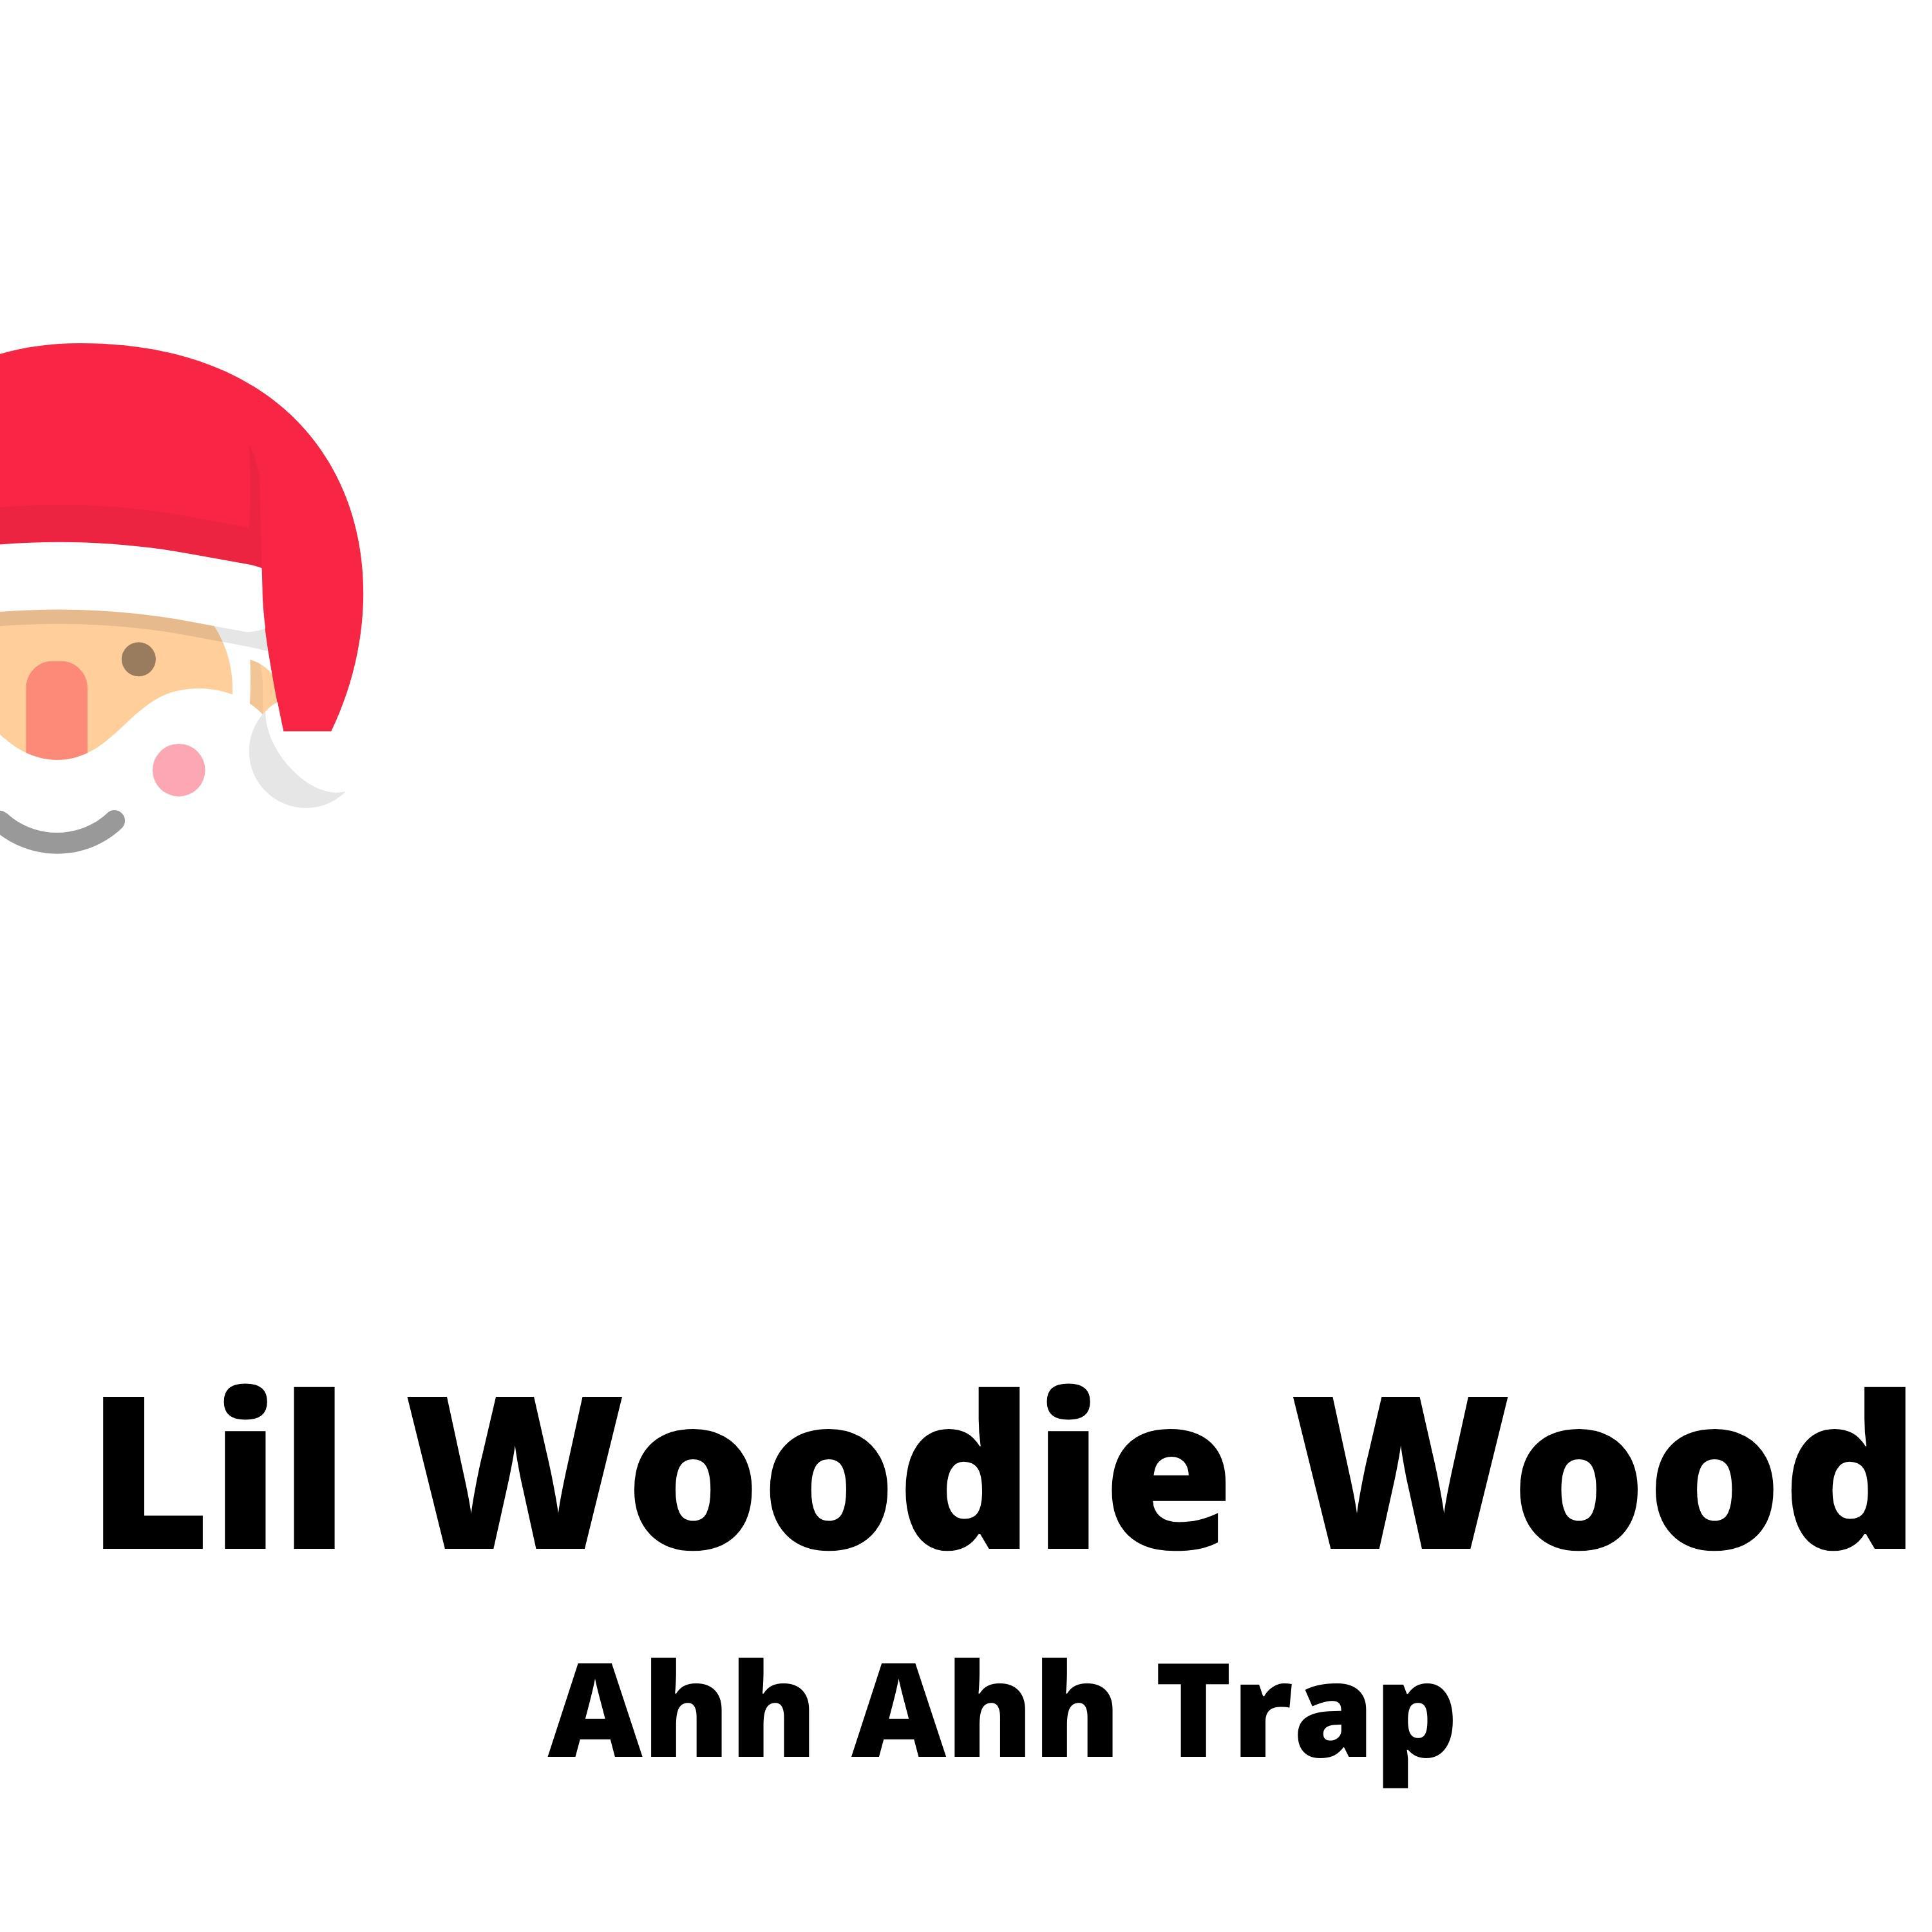 Lil Woodie Wood - Ahh Ahh Trap (feat. Eno)